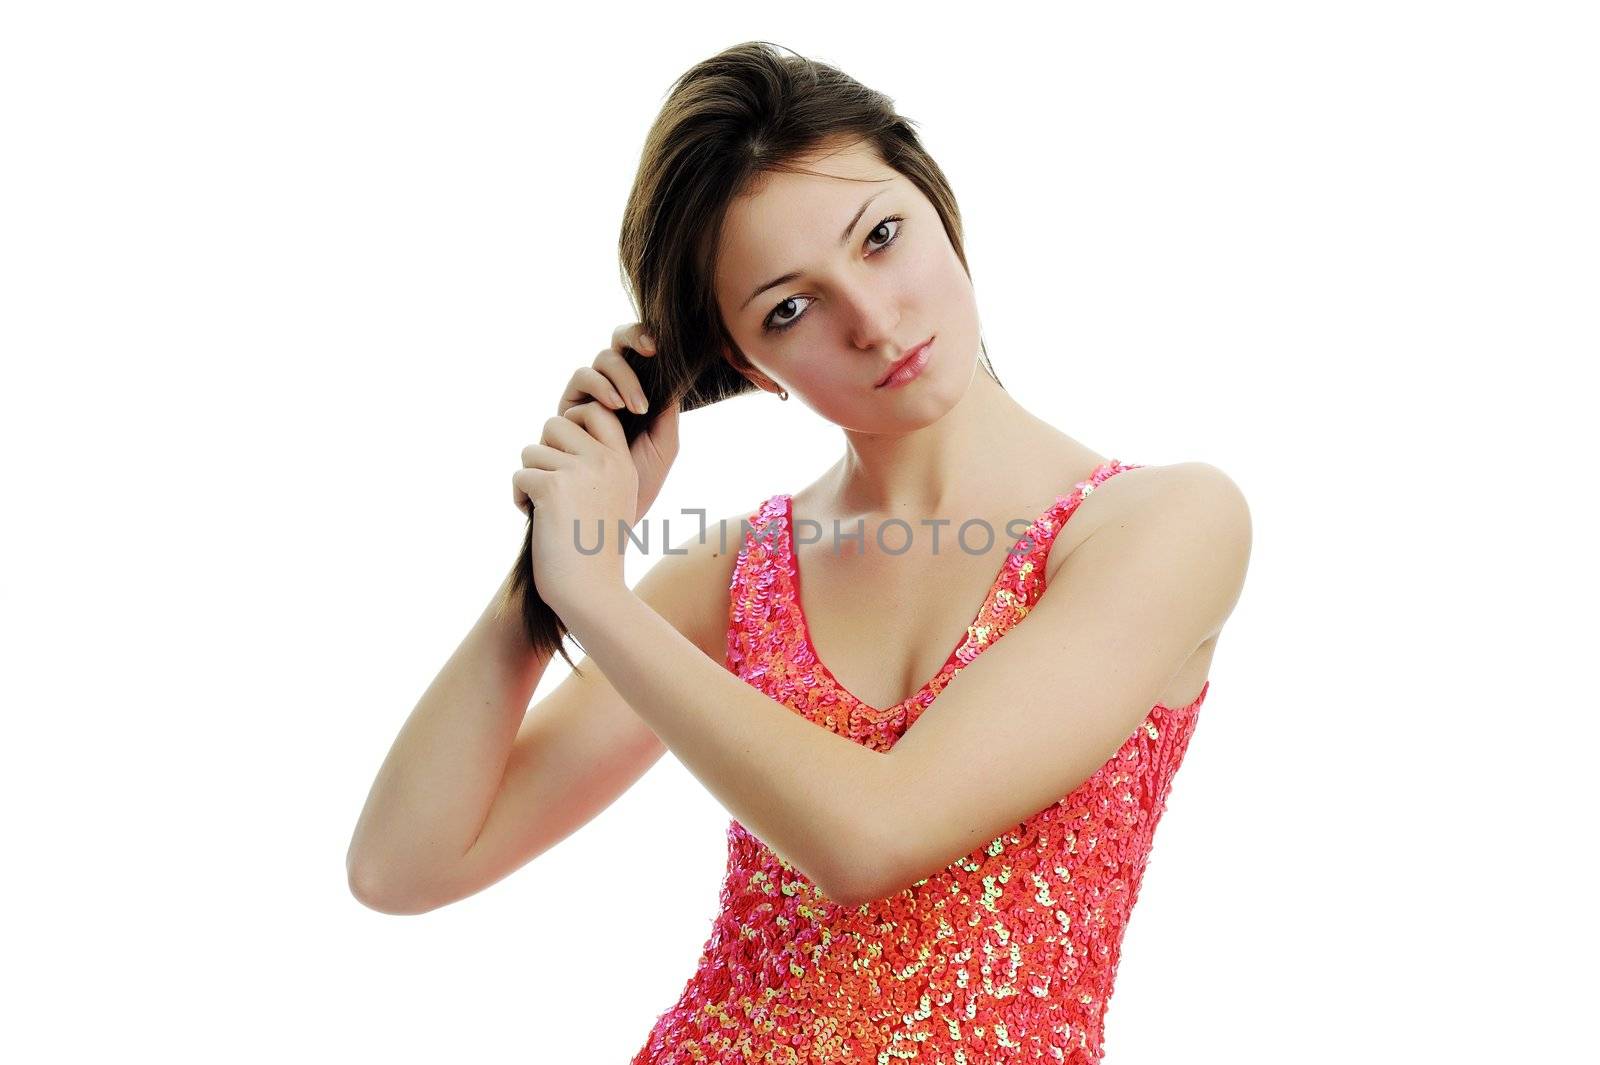 An image of a young beautiful girl in a dress